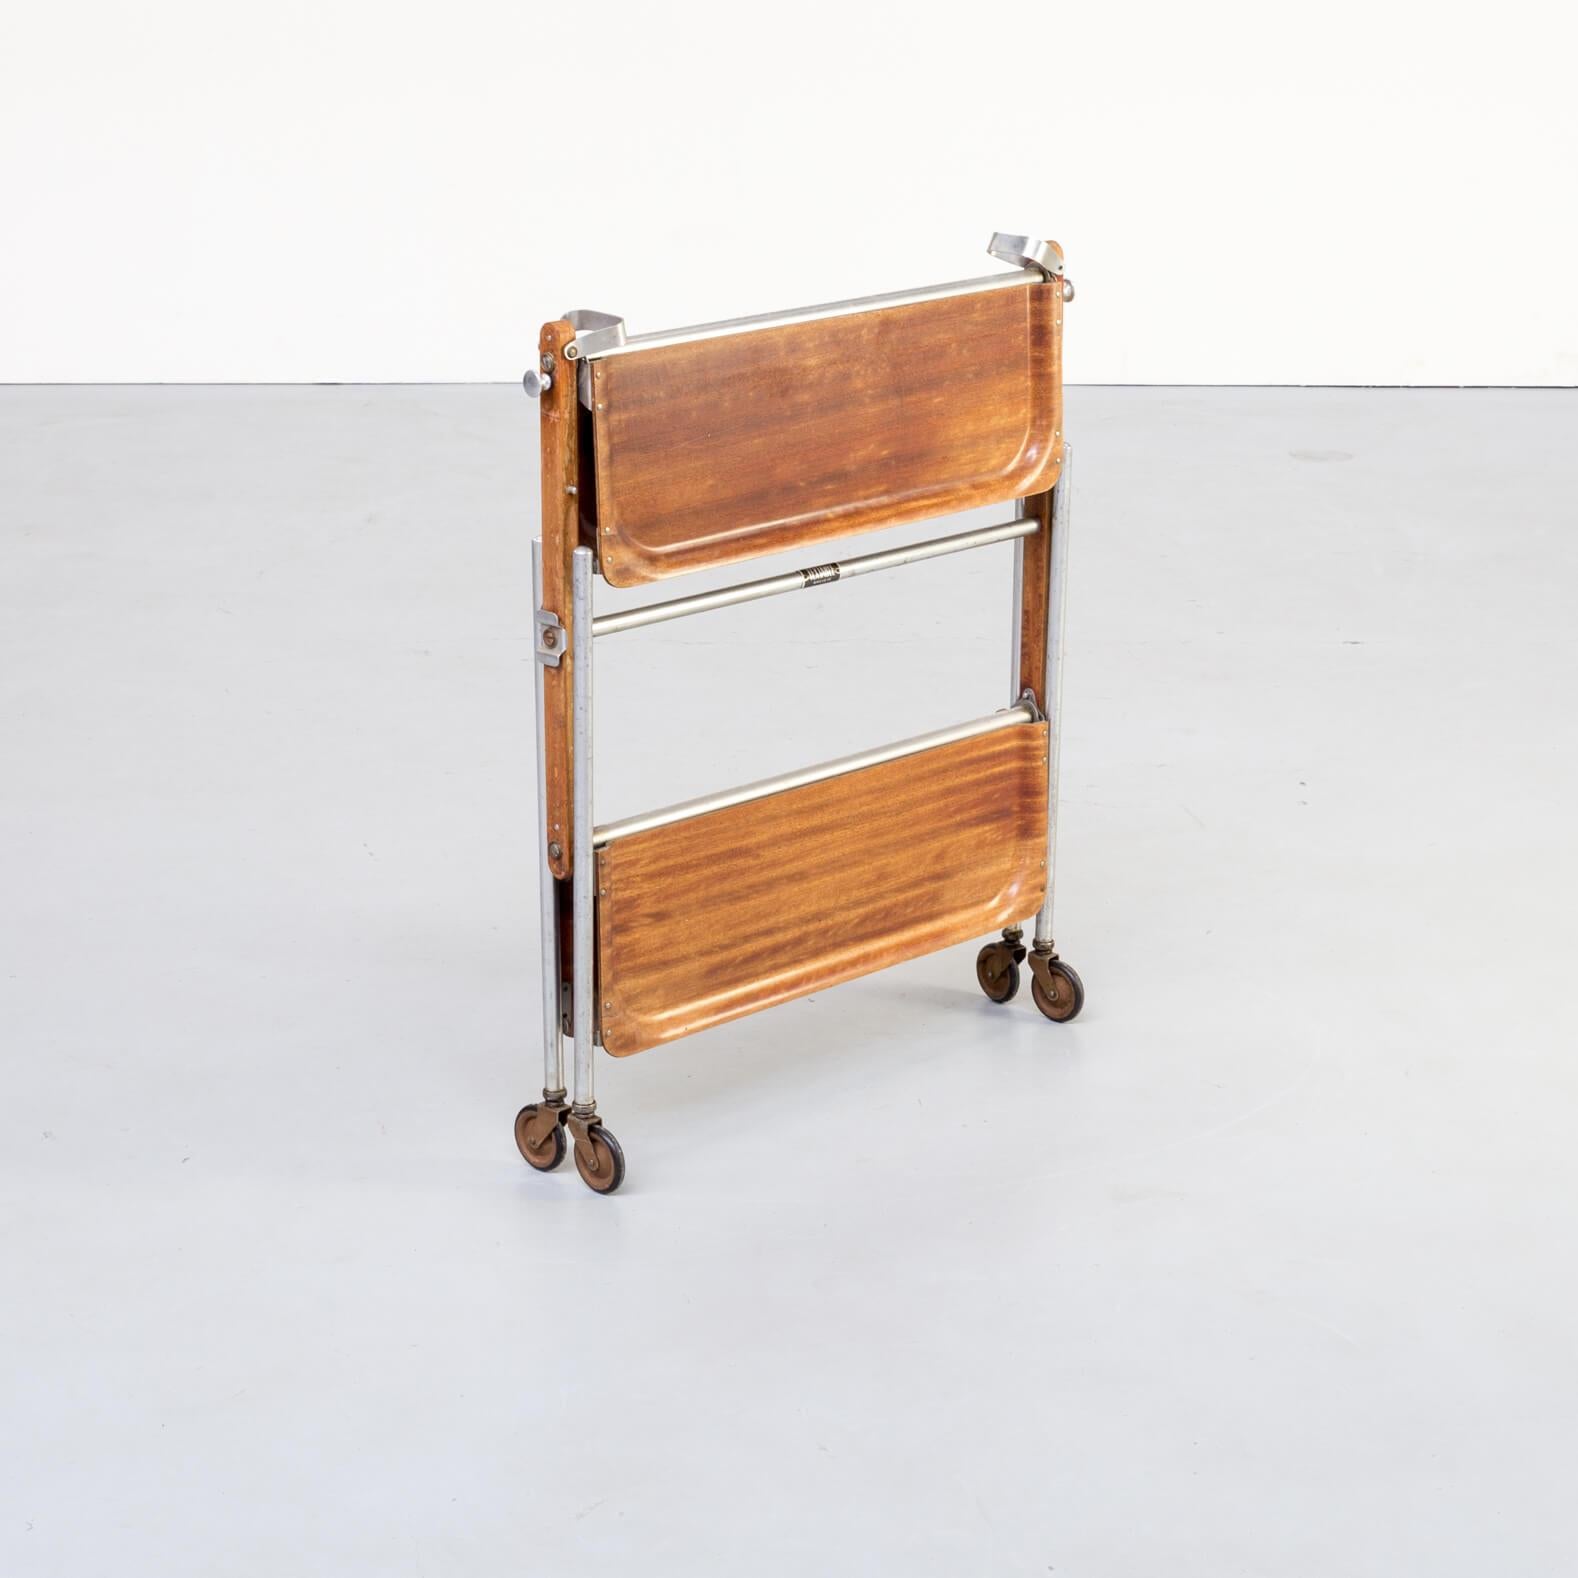 French design serving cart/trolley that can be folded up for easy storage, made by the company Textable, Paris.